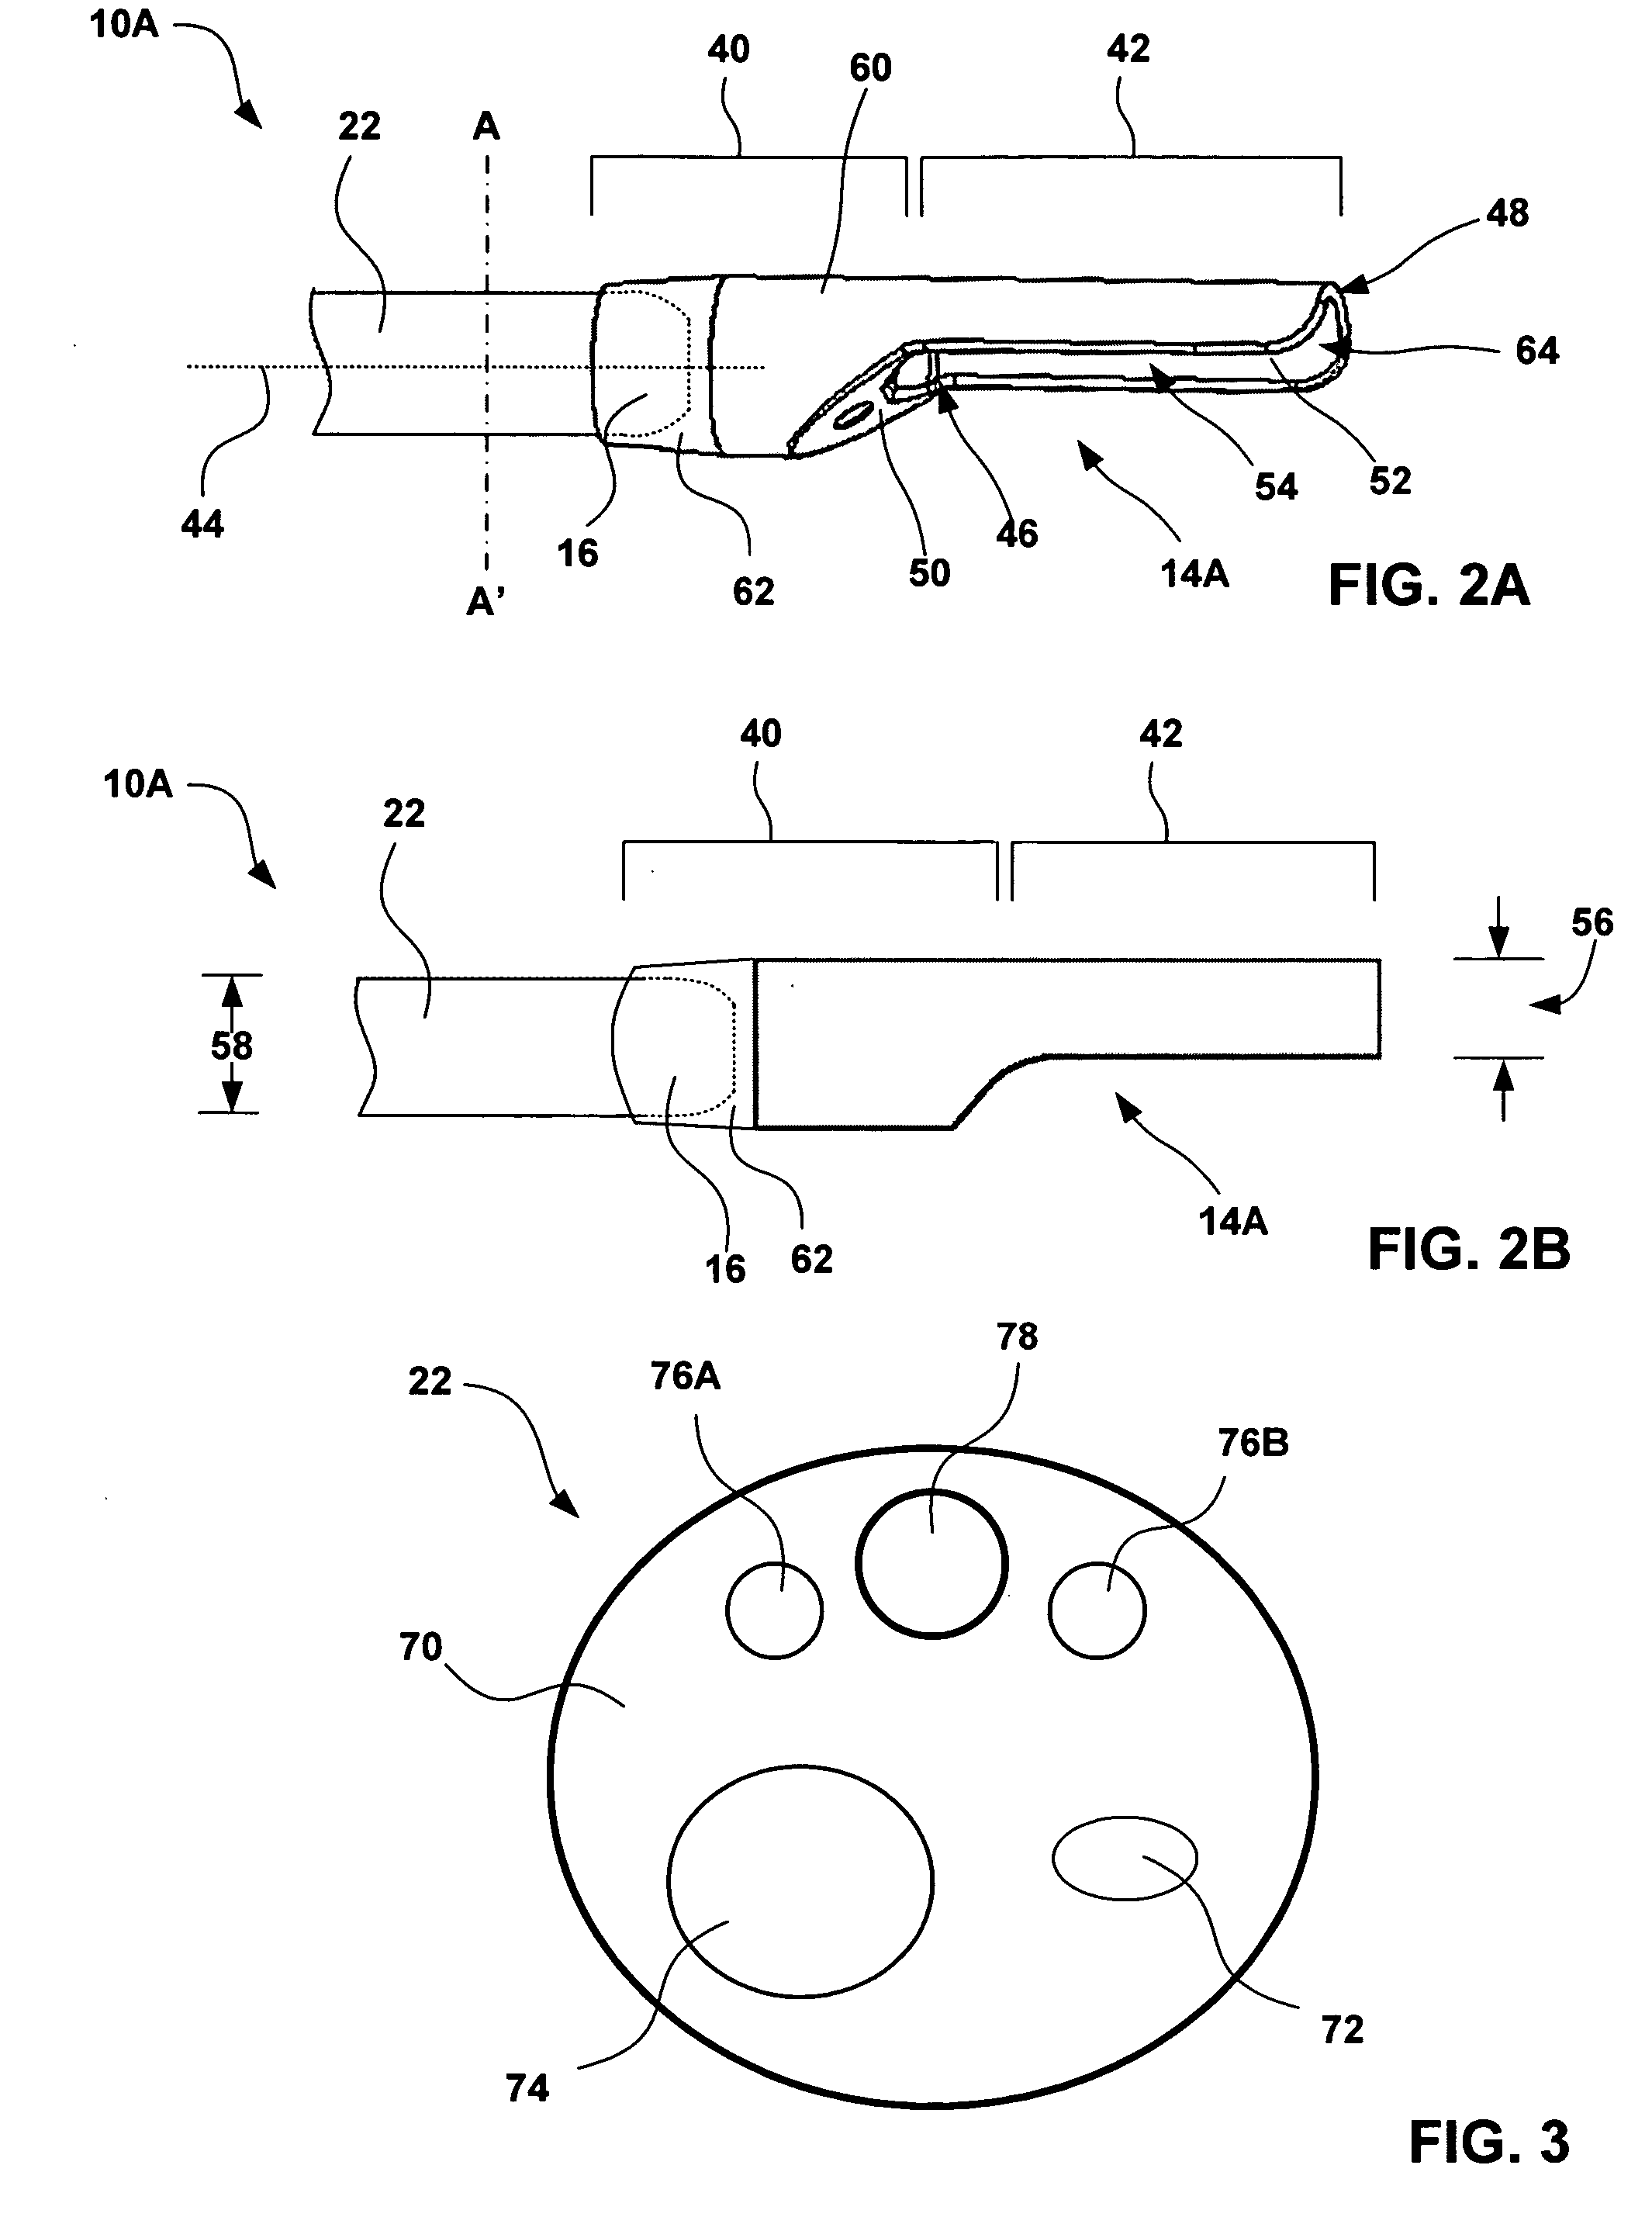 Distal portion of an endoscopic delivery system